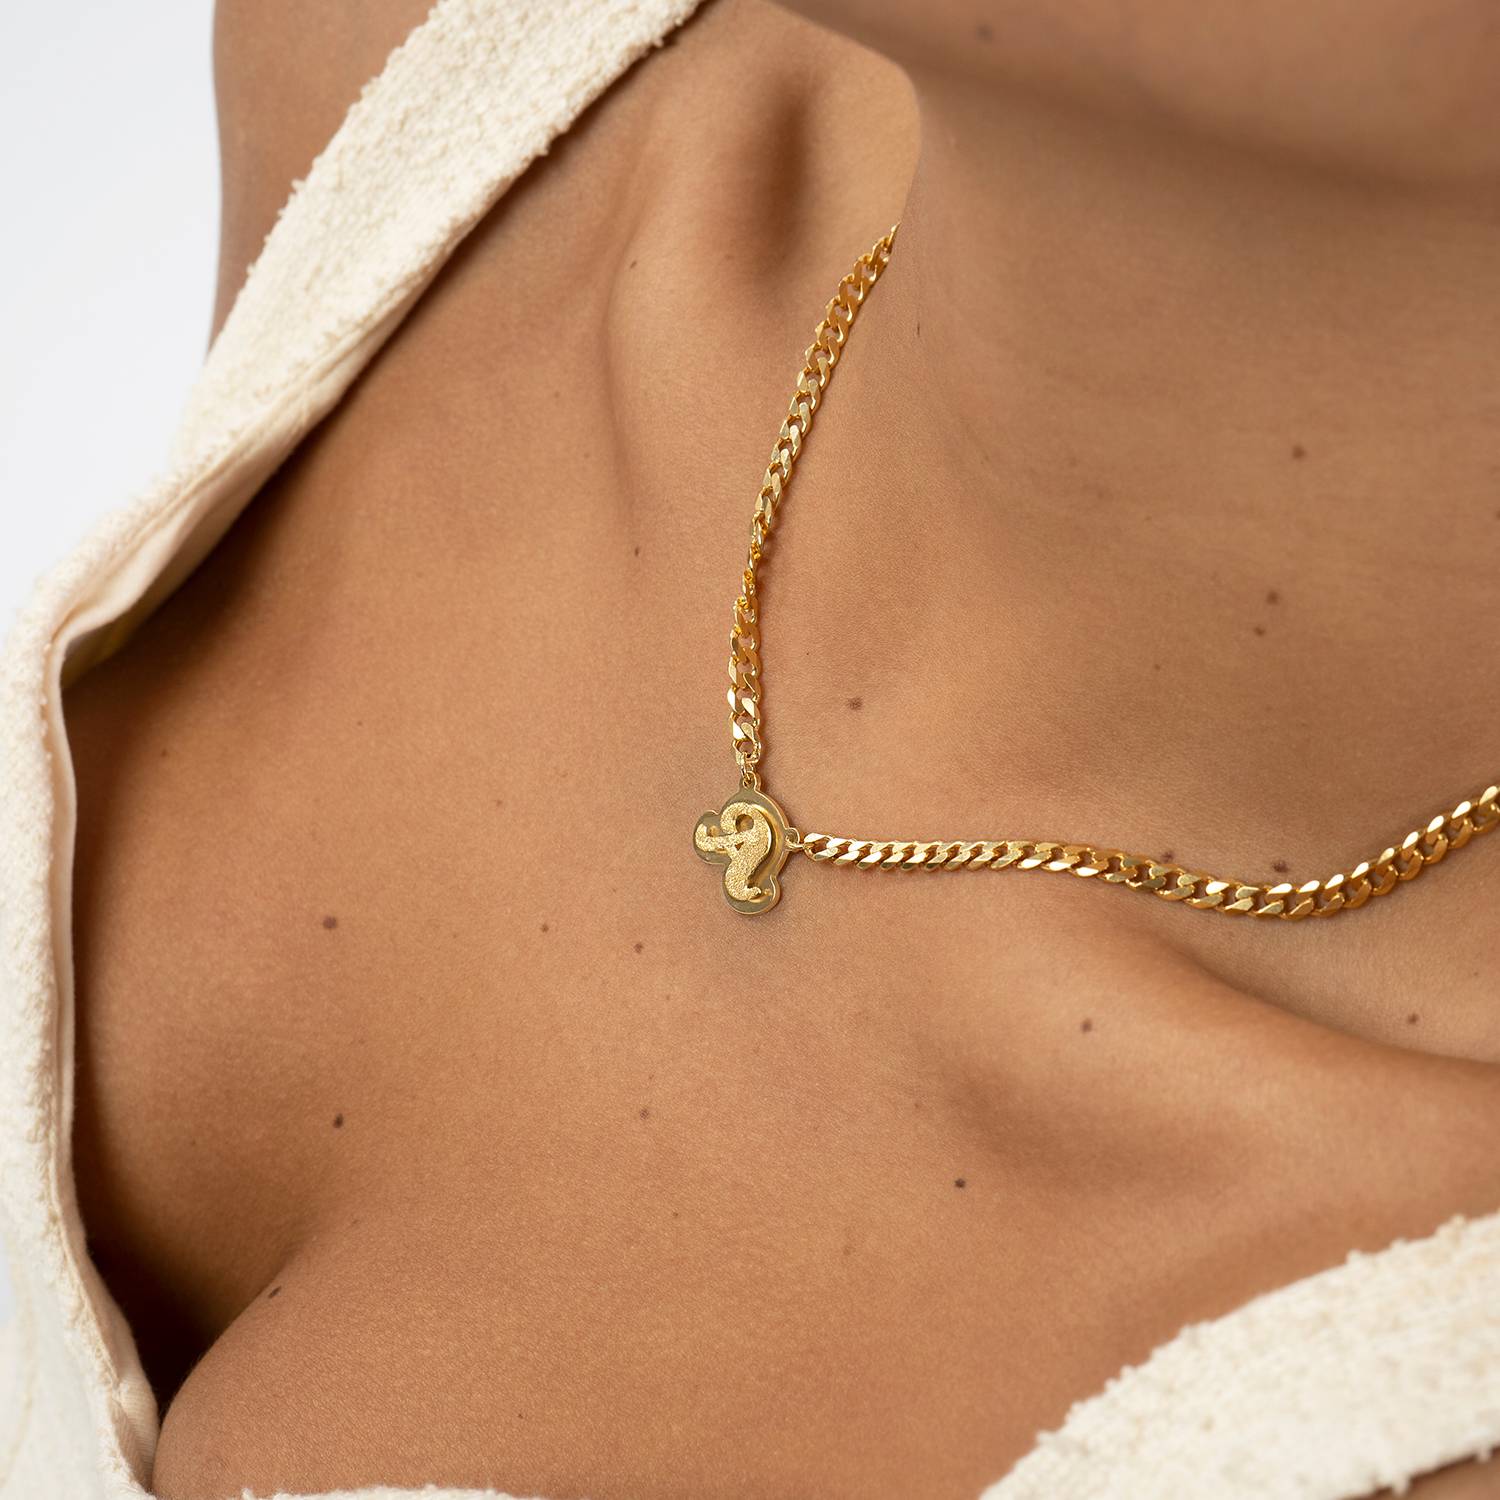 Brandi Double Plated Name Necklace in 18K Gold Vermeil-2 product photo